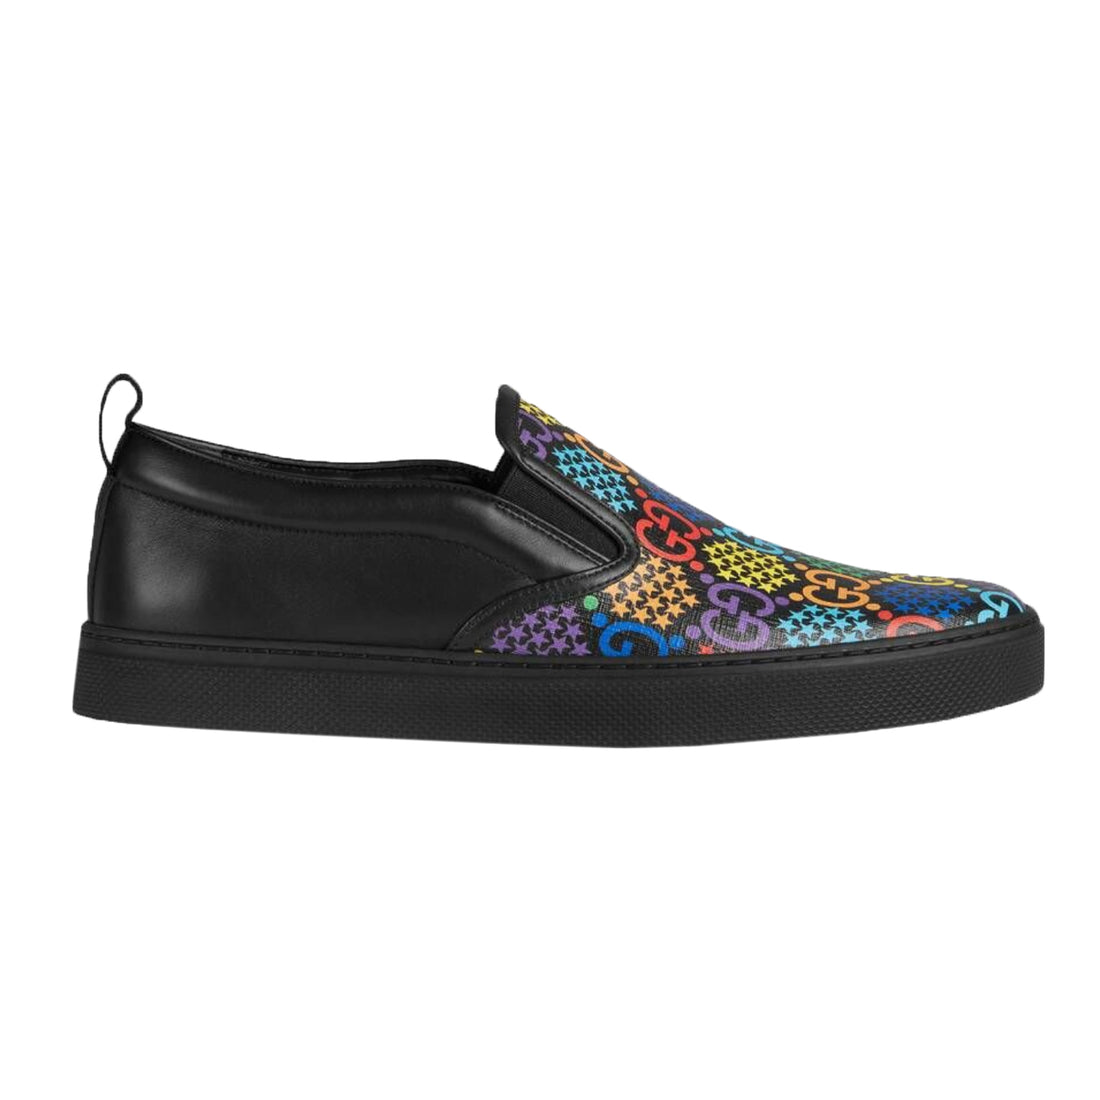 Gucci GG Psychedelic Print Slip On